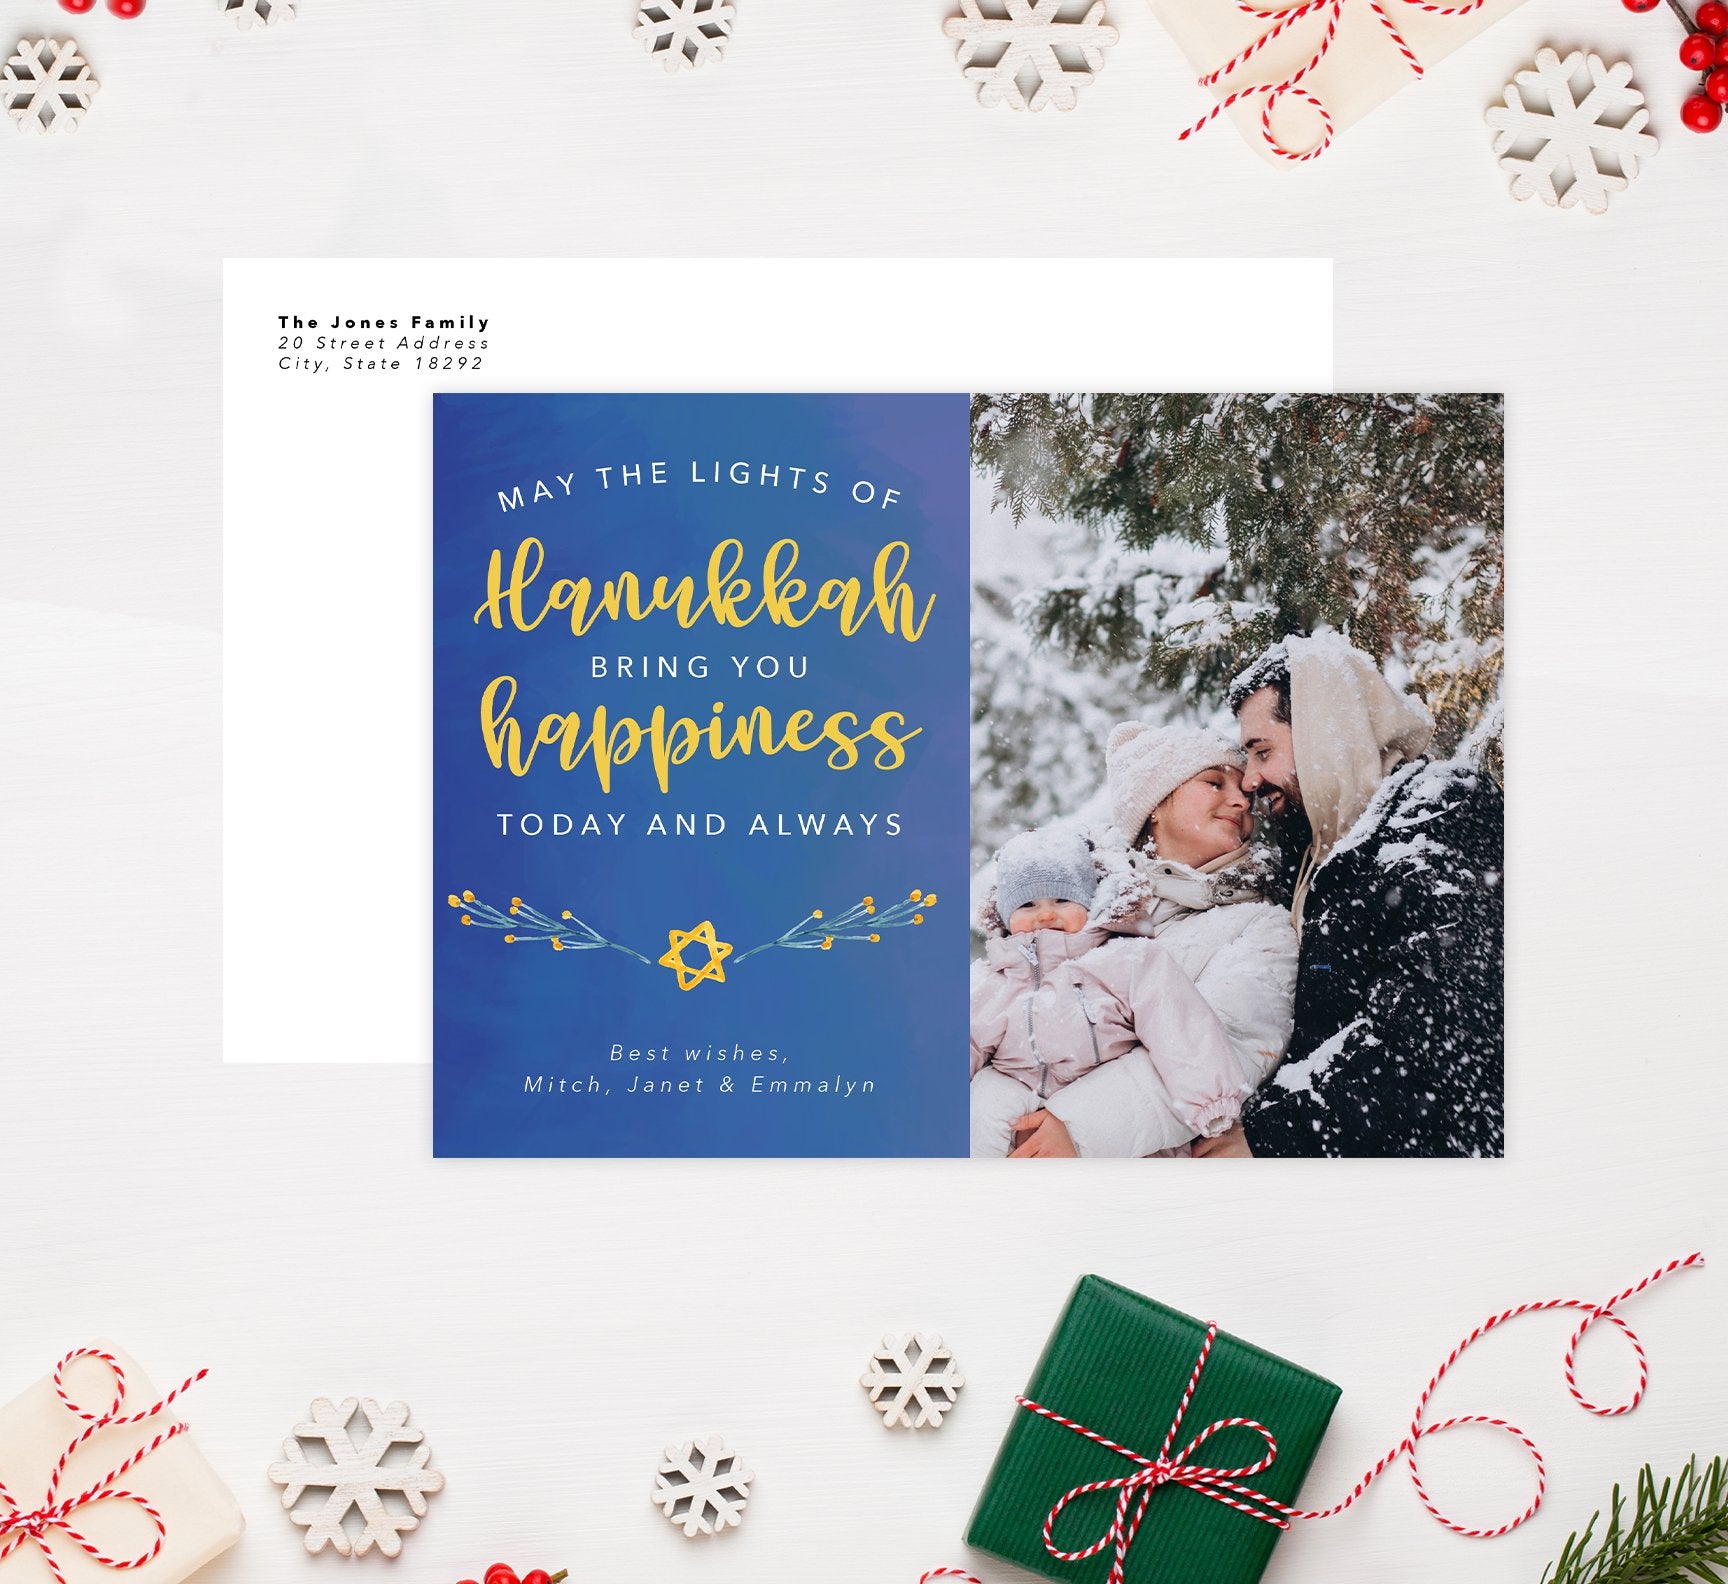 Hanukkah Happiness Holiday Card Mockup; Holiday card with envelope and return address printed on it. 